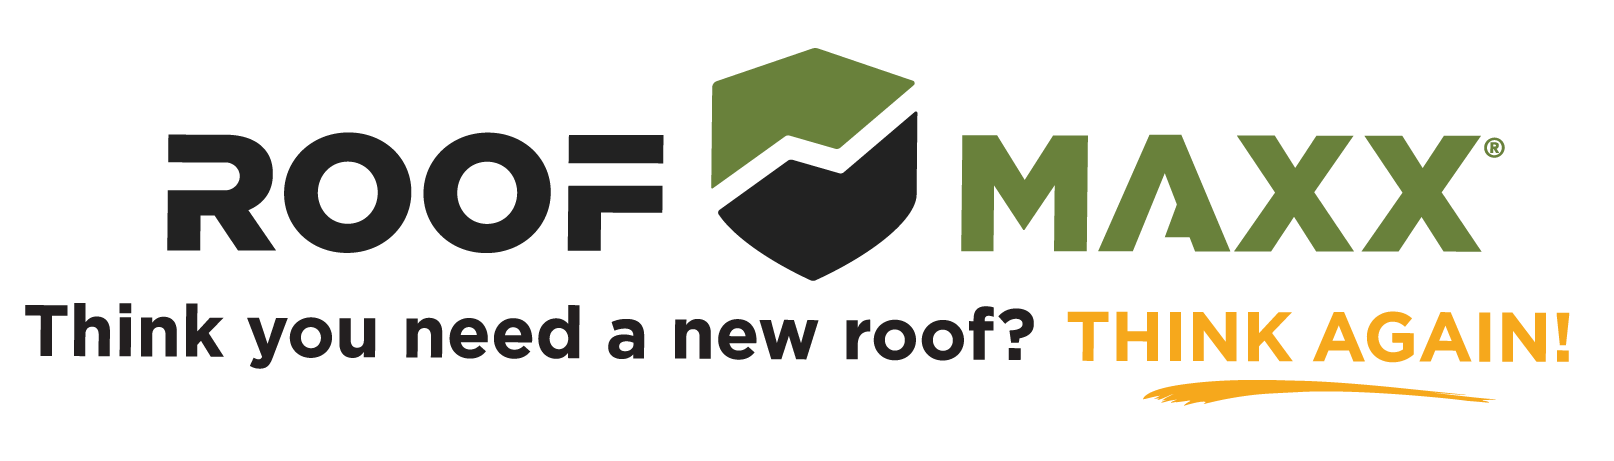 Roof Maxx - Think you need a new roof? Think again!